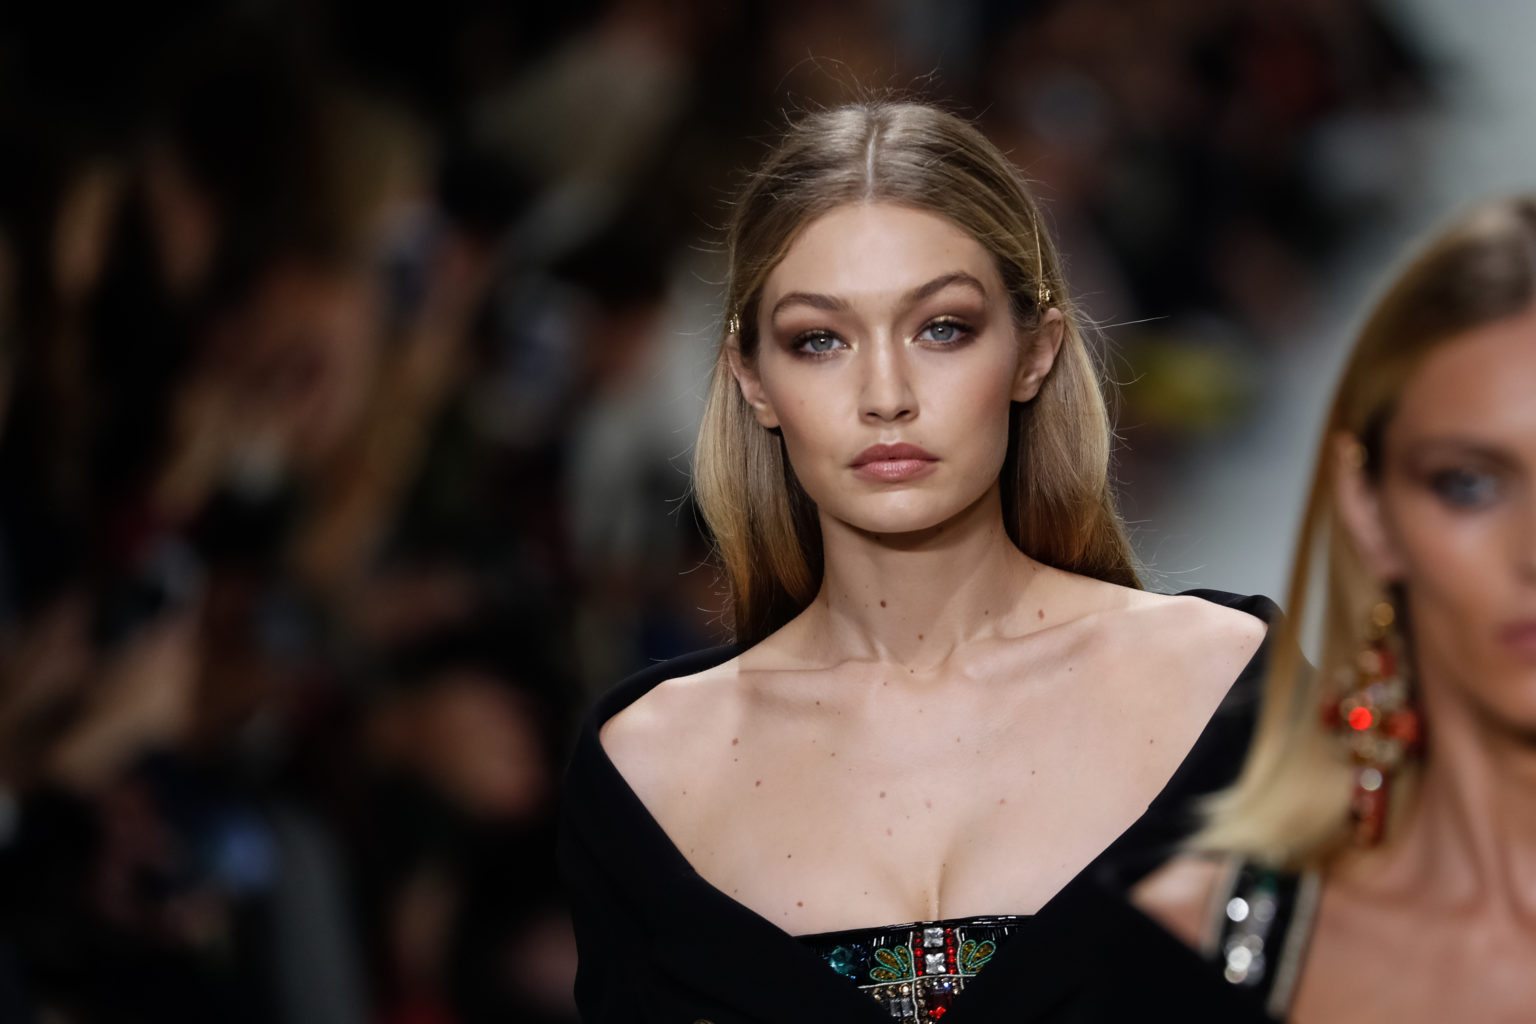 Gigi Hadid Asks Paparazzi In An Open Letter To Blur Photos